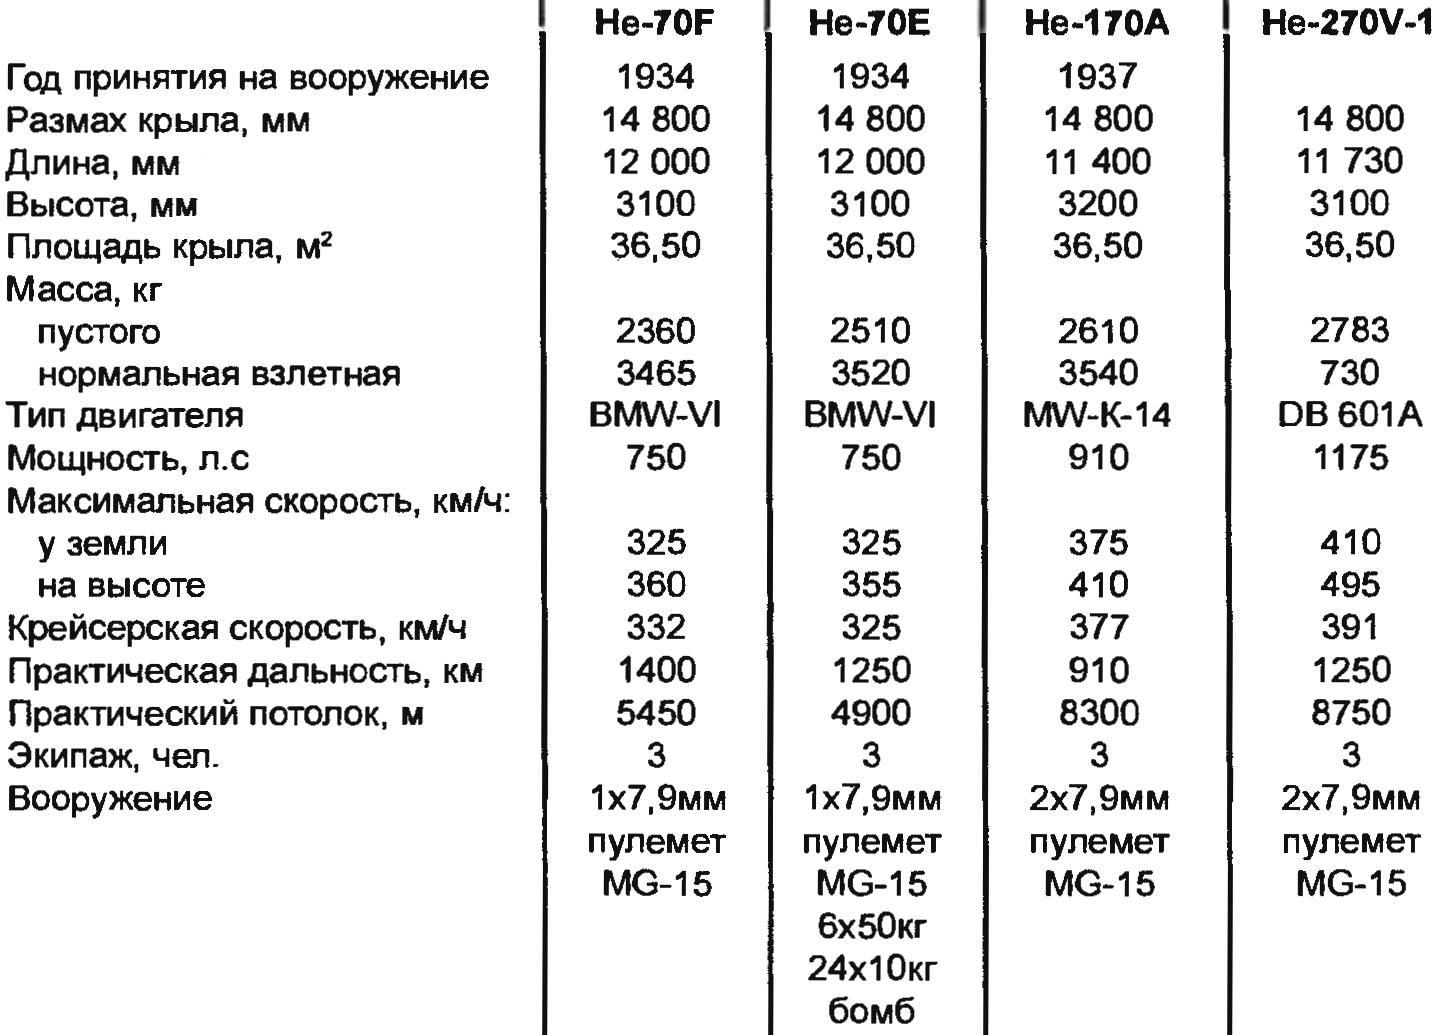 The performance characteristics of the modifications of the aircraft Not HEINKEL-70 BLITZ